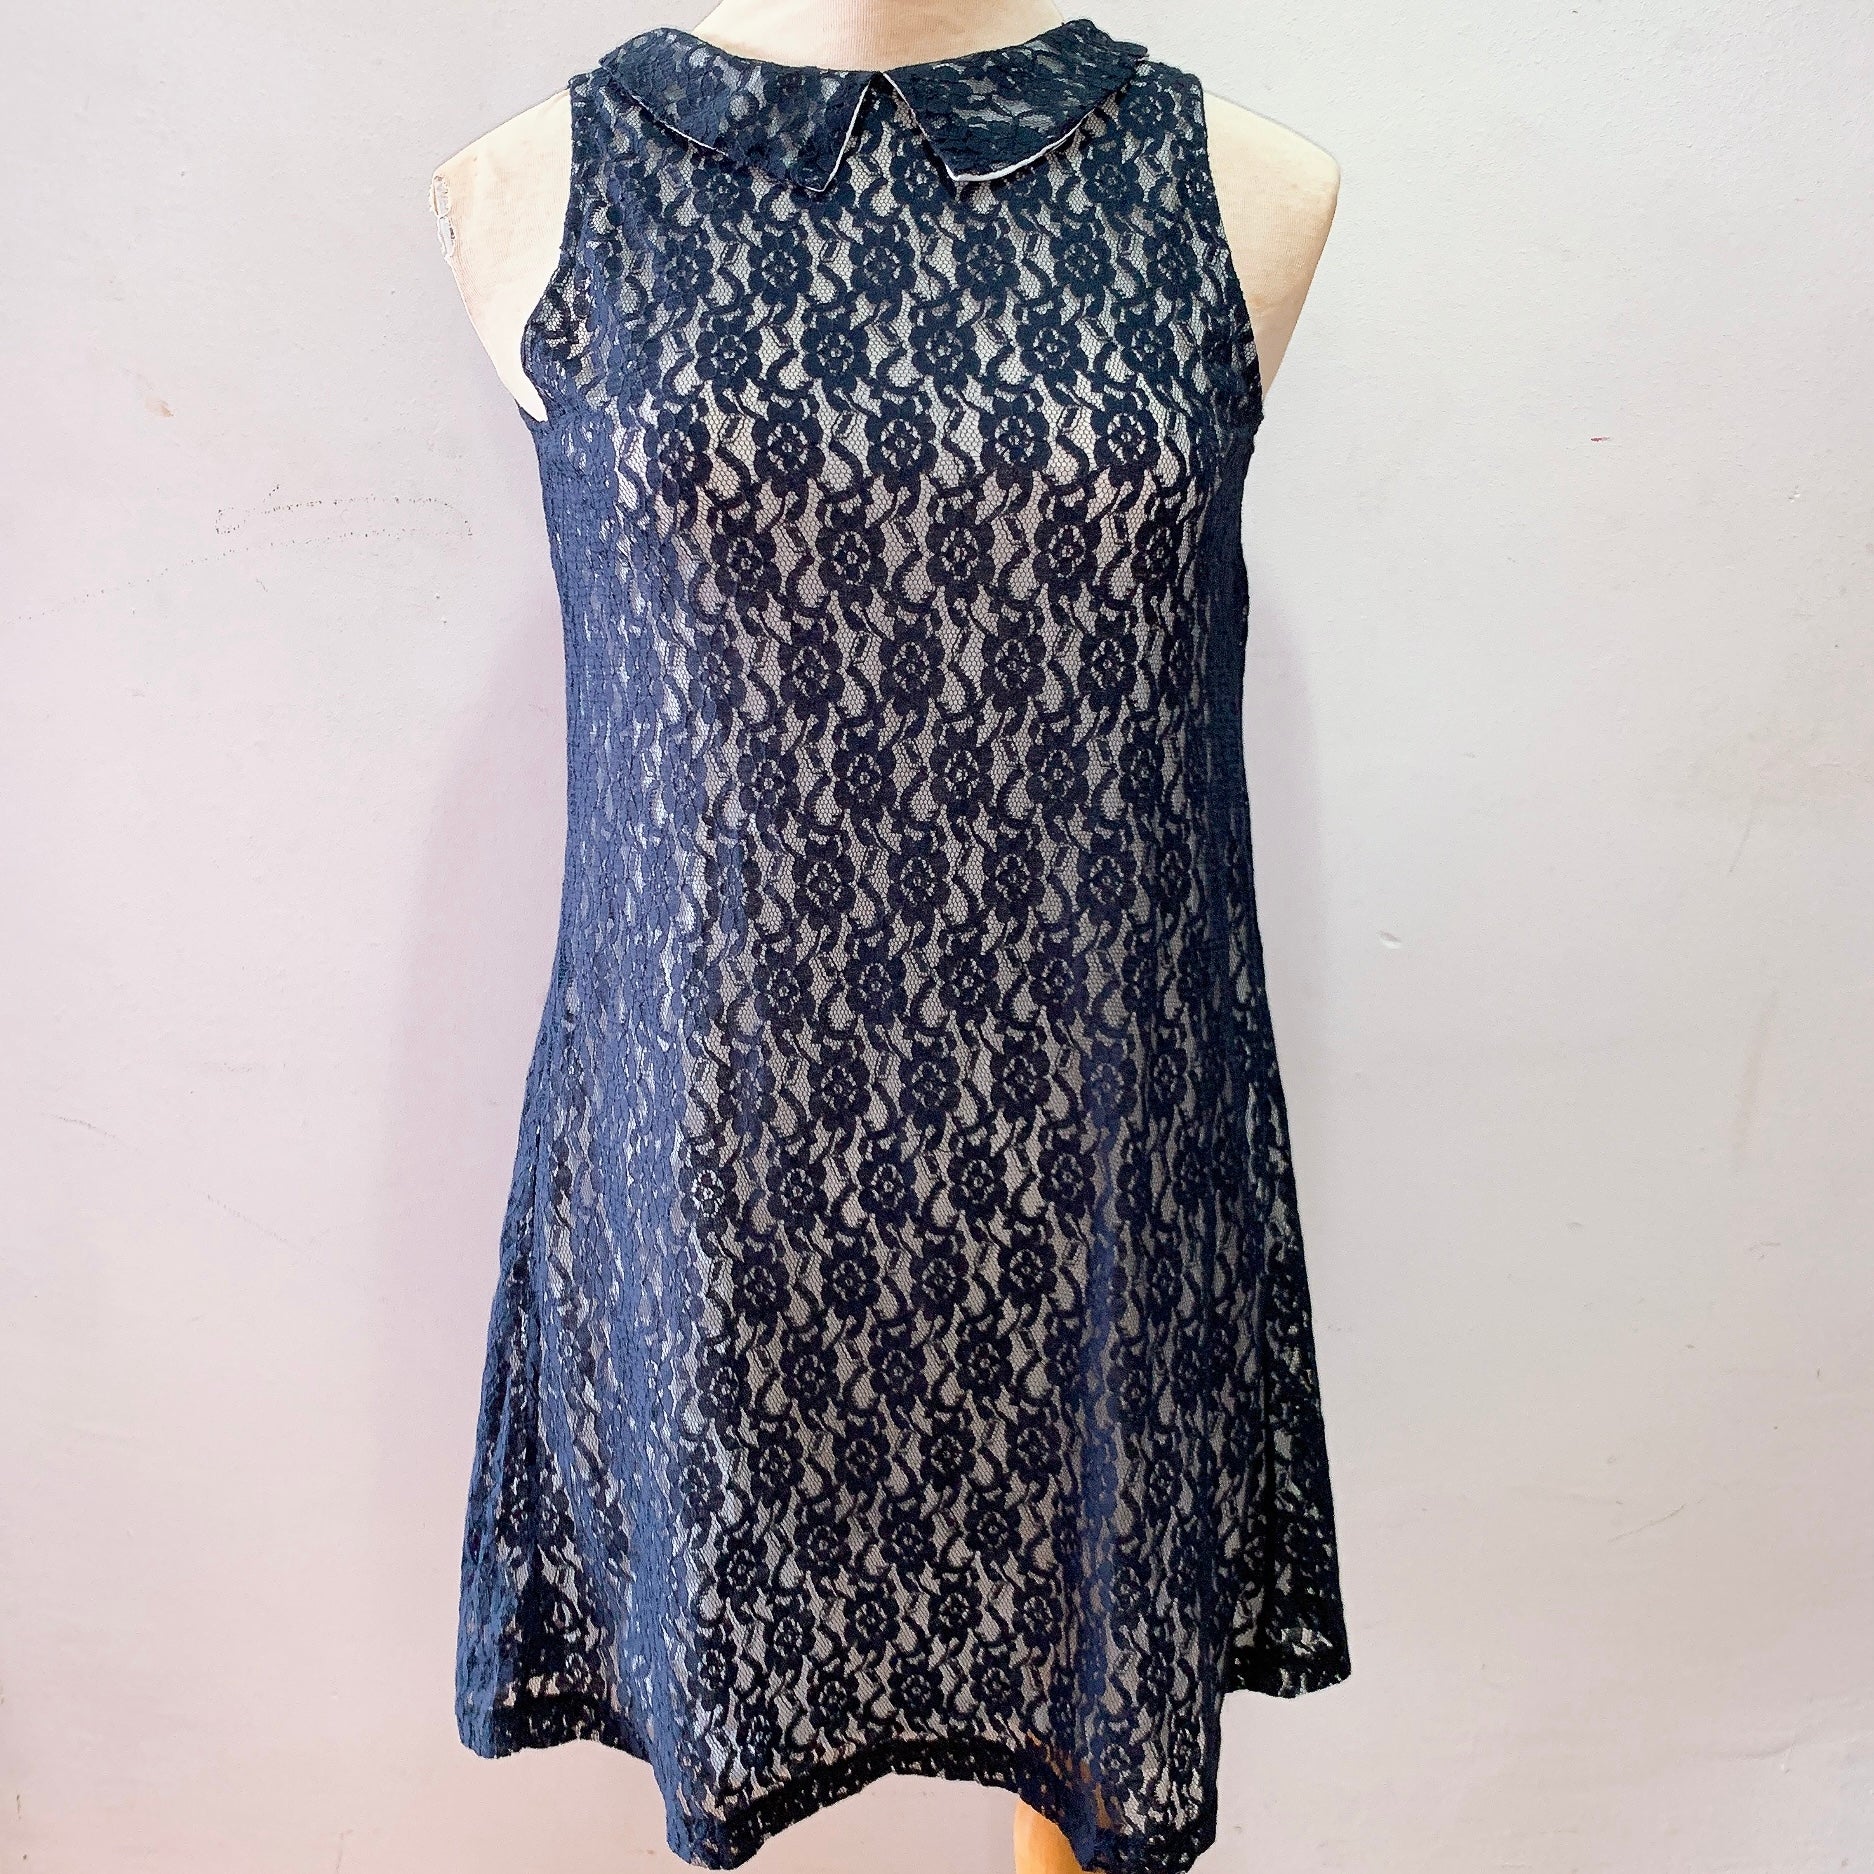 (BRAND NEW) Navy Lace Sleeveless Structured Dress